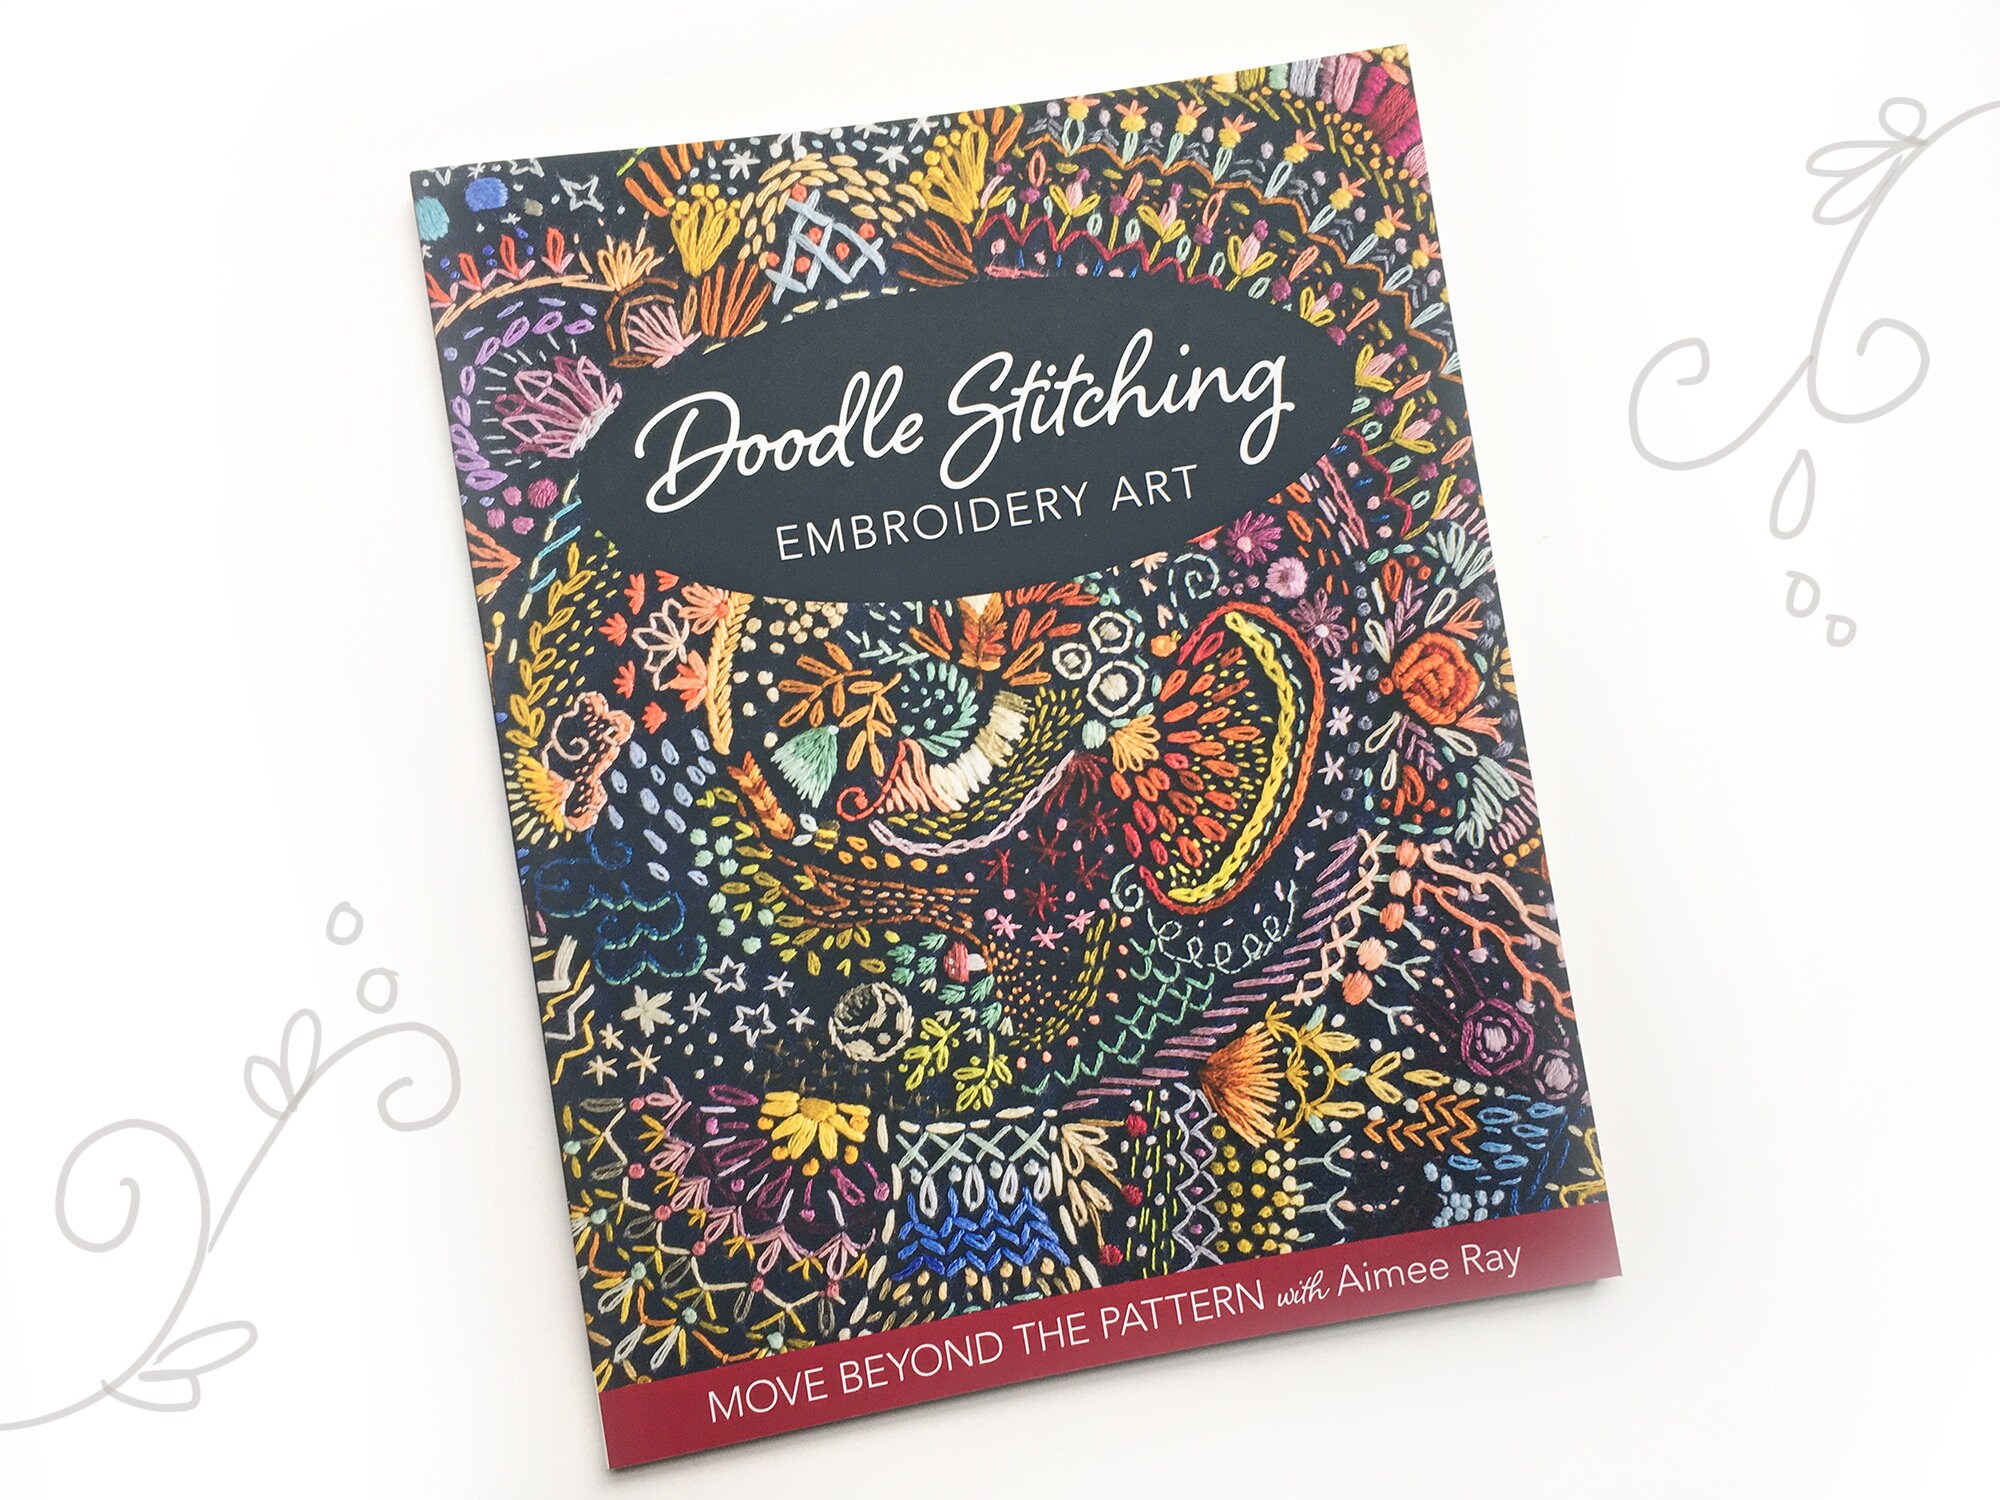 Doodle Stitching Transfer Pack Book by Aimee Ray, Iron on Transfer Beginner  Hand Embroidery Patterns, Modern Needlework Designs 